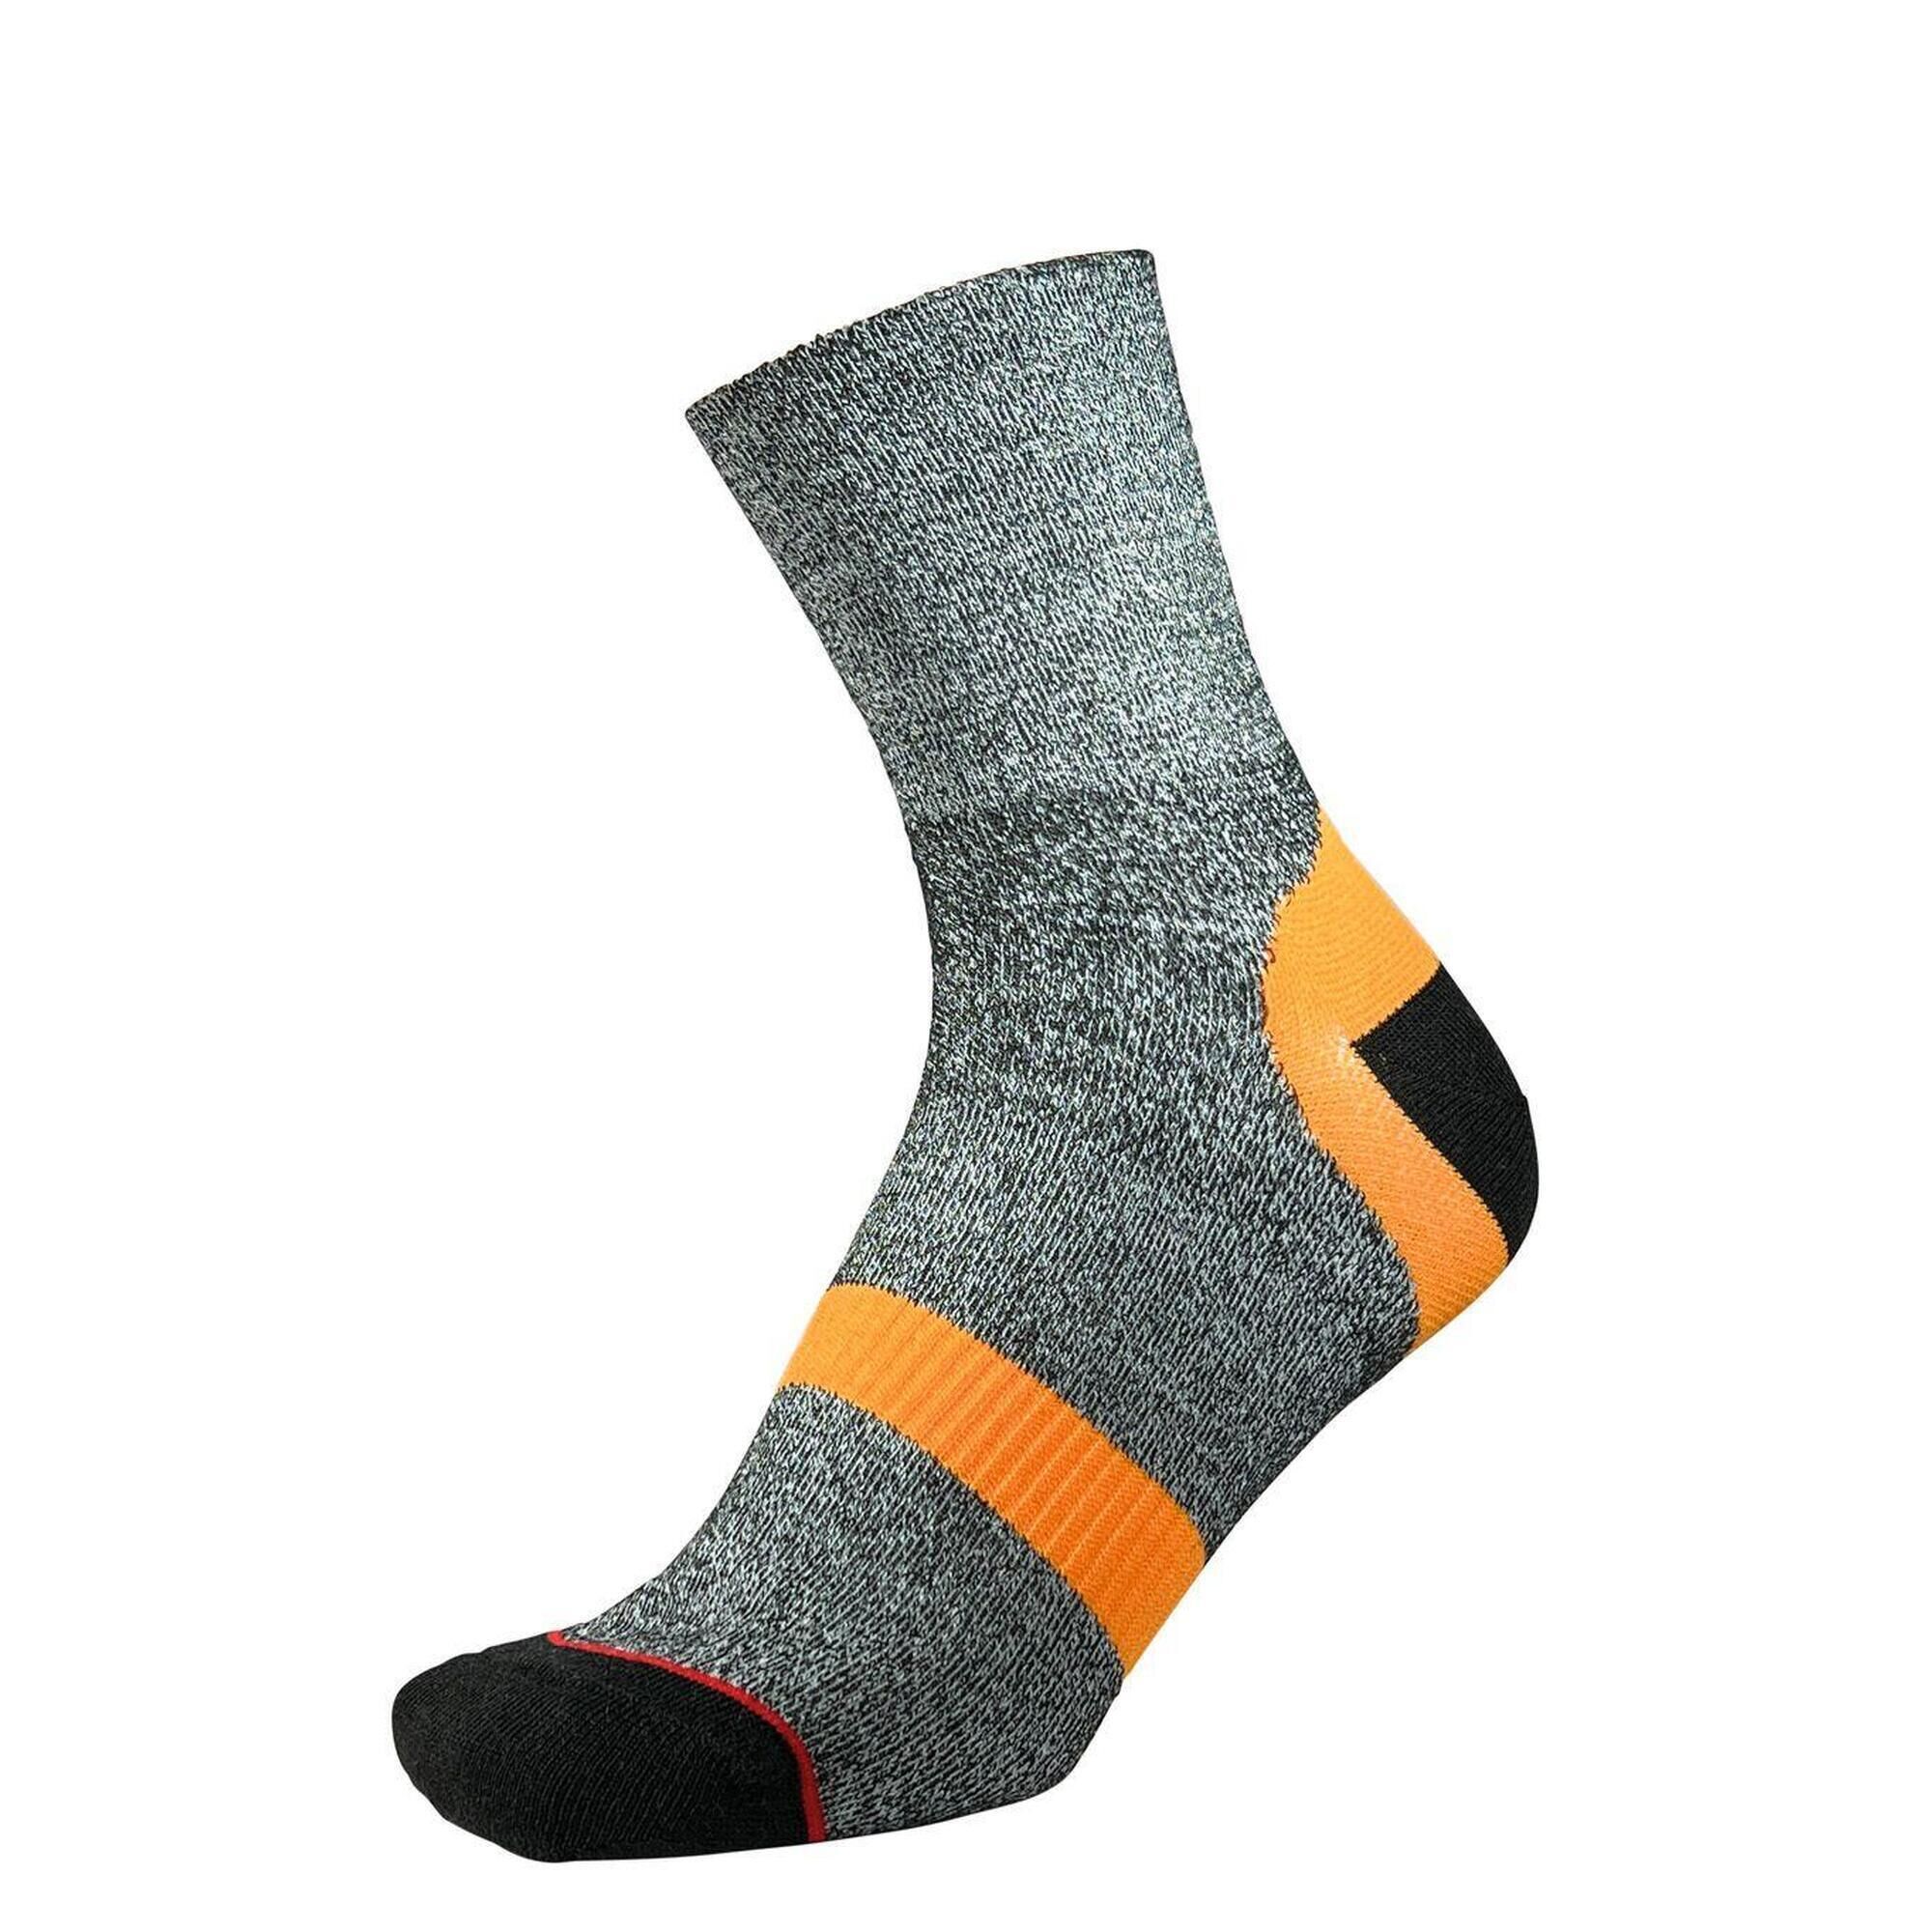 1000 MILE 1000 Mile Approach Repreve Double Layer Sock Charcoal Marl Orange